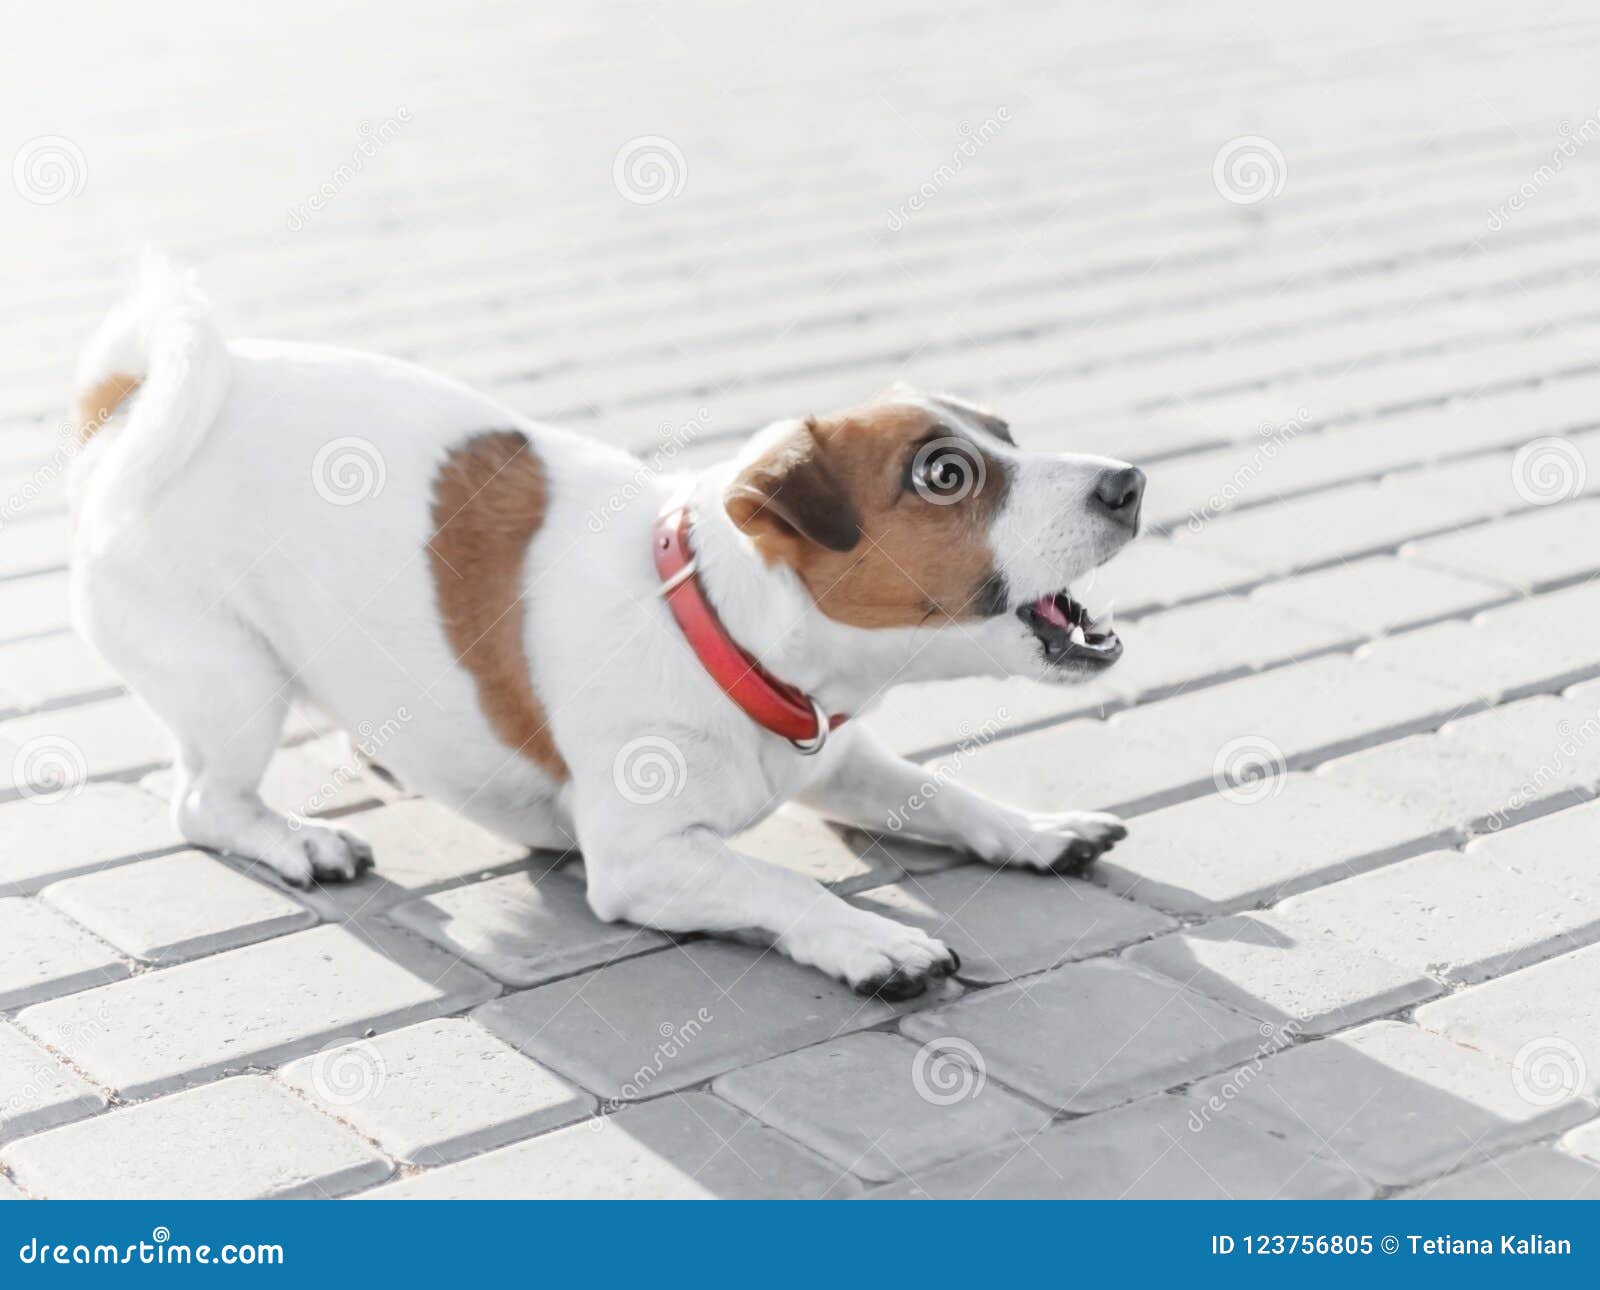 a small dog jack russell terrier in red collar running, jumping, playing and barking on gray sidewalk tile at sunny